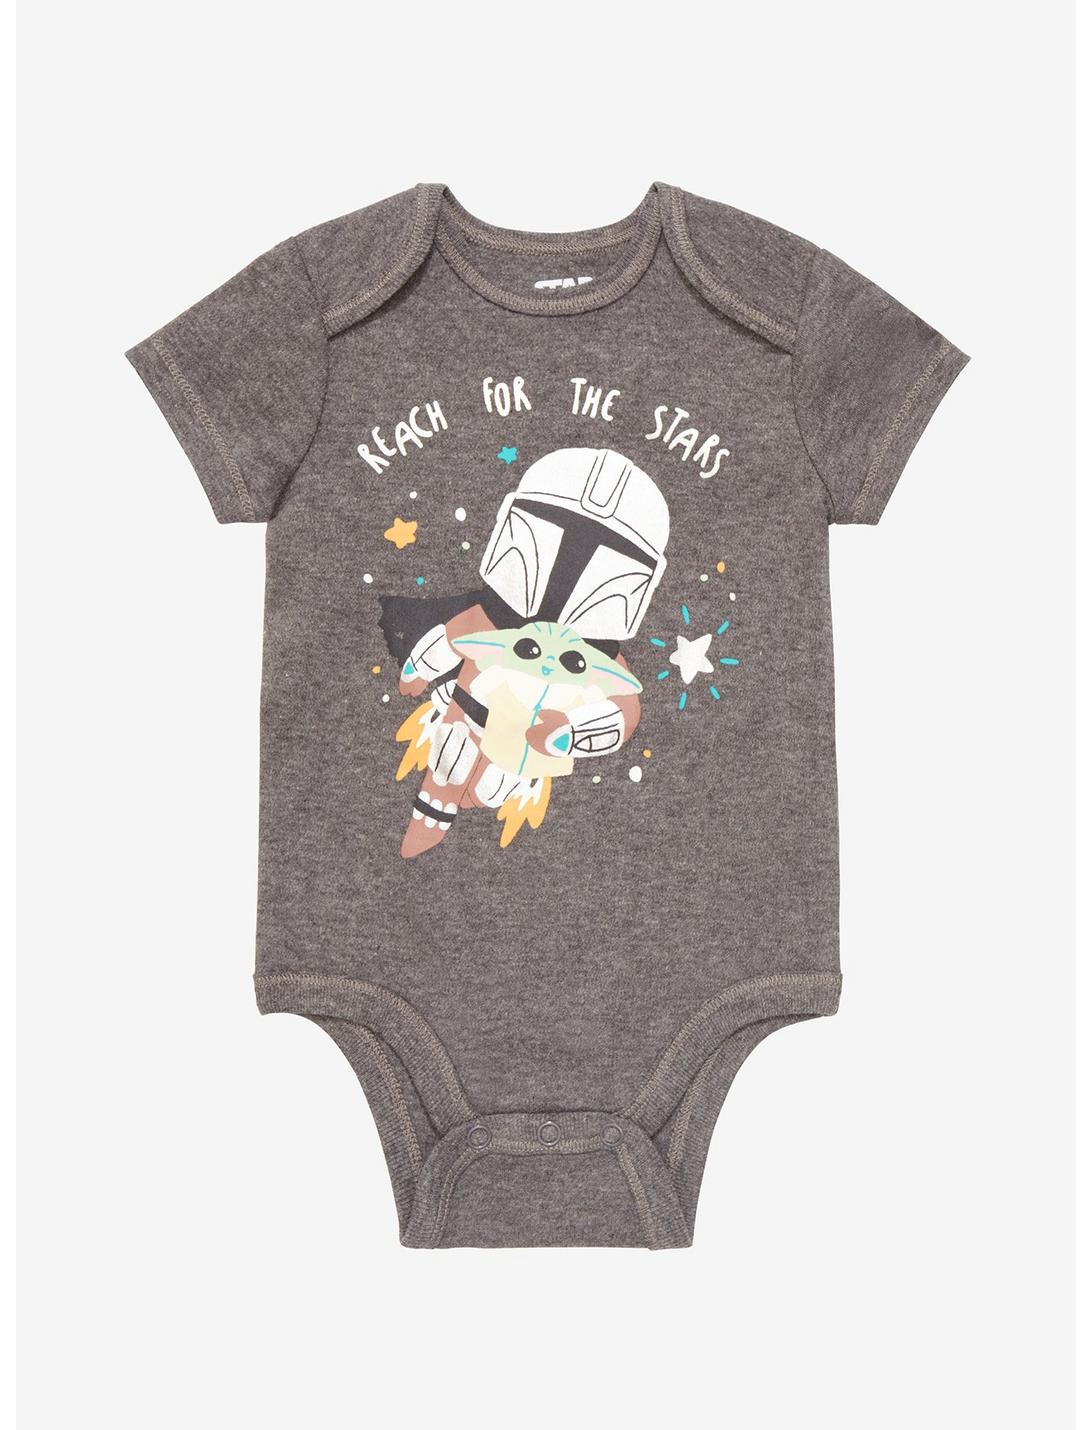 Star Wars The Mandalorian Reach for the Stars Infant One-Piece - BoxLunch Exclusive, GREY  BLACK, hi-res